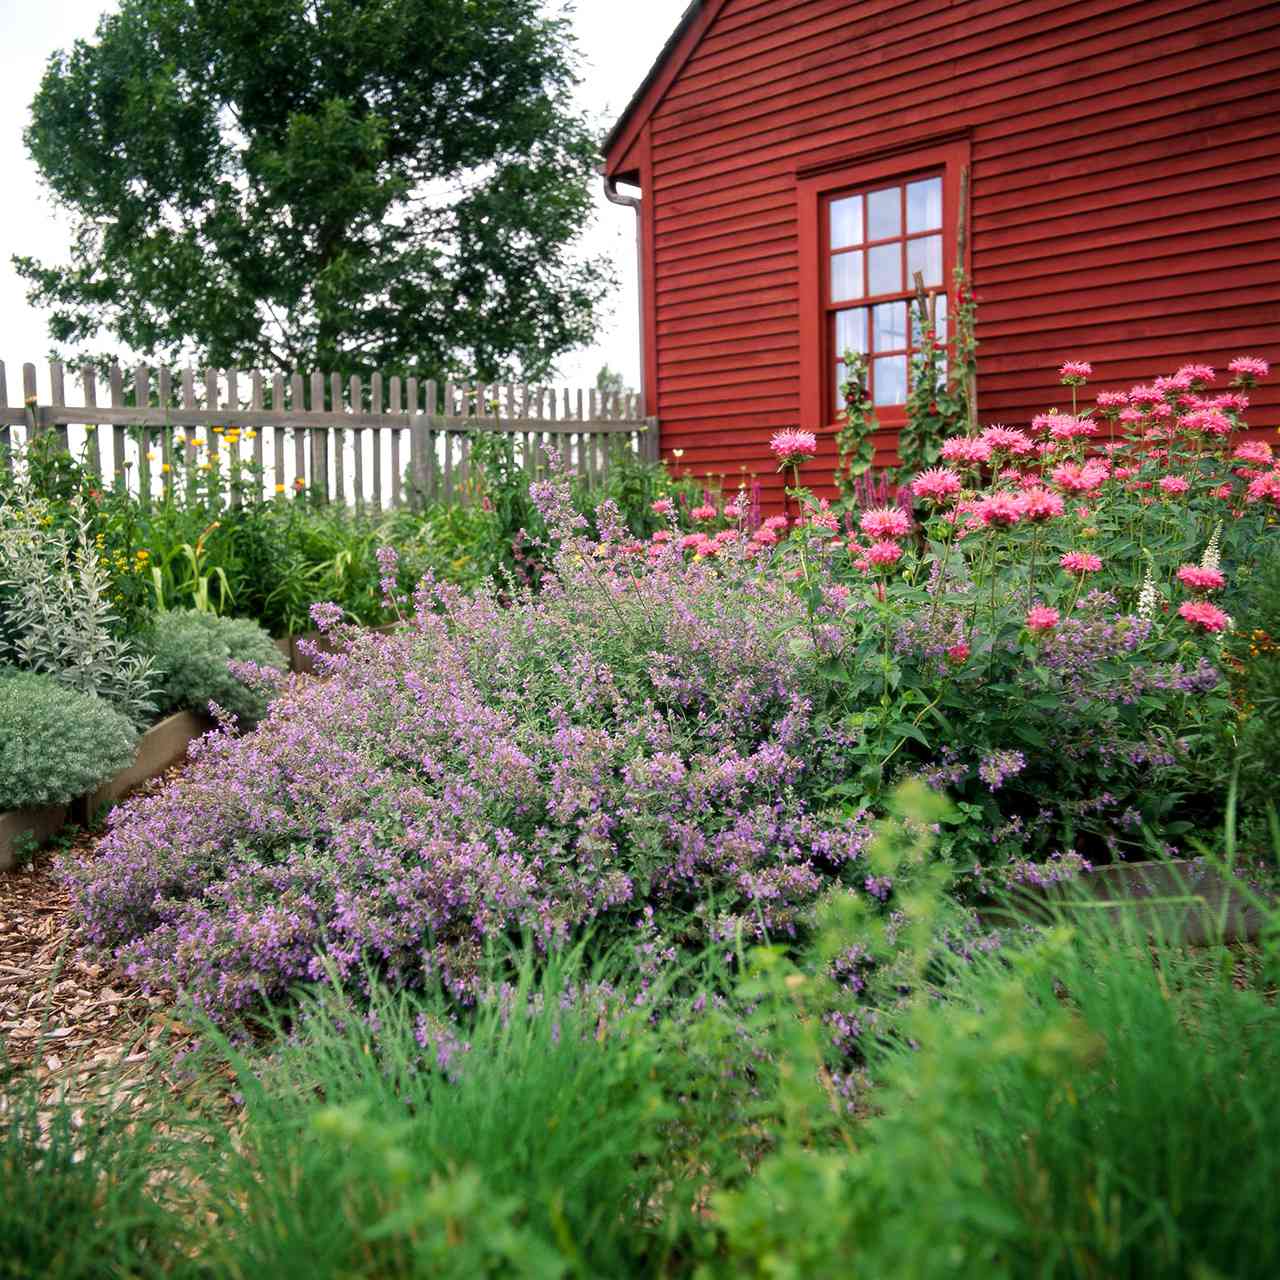 Catmint and Pink bee balm garden near red home